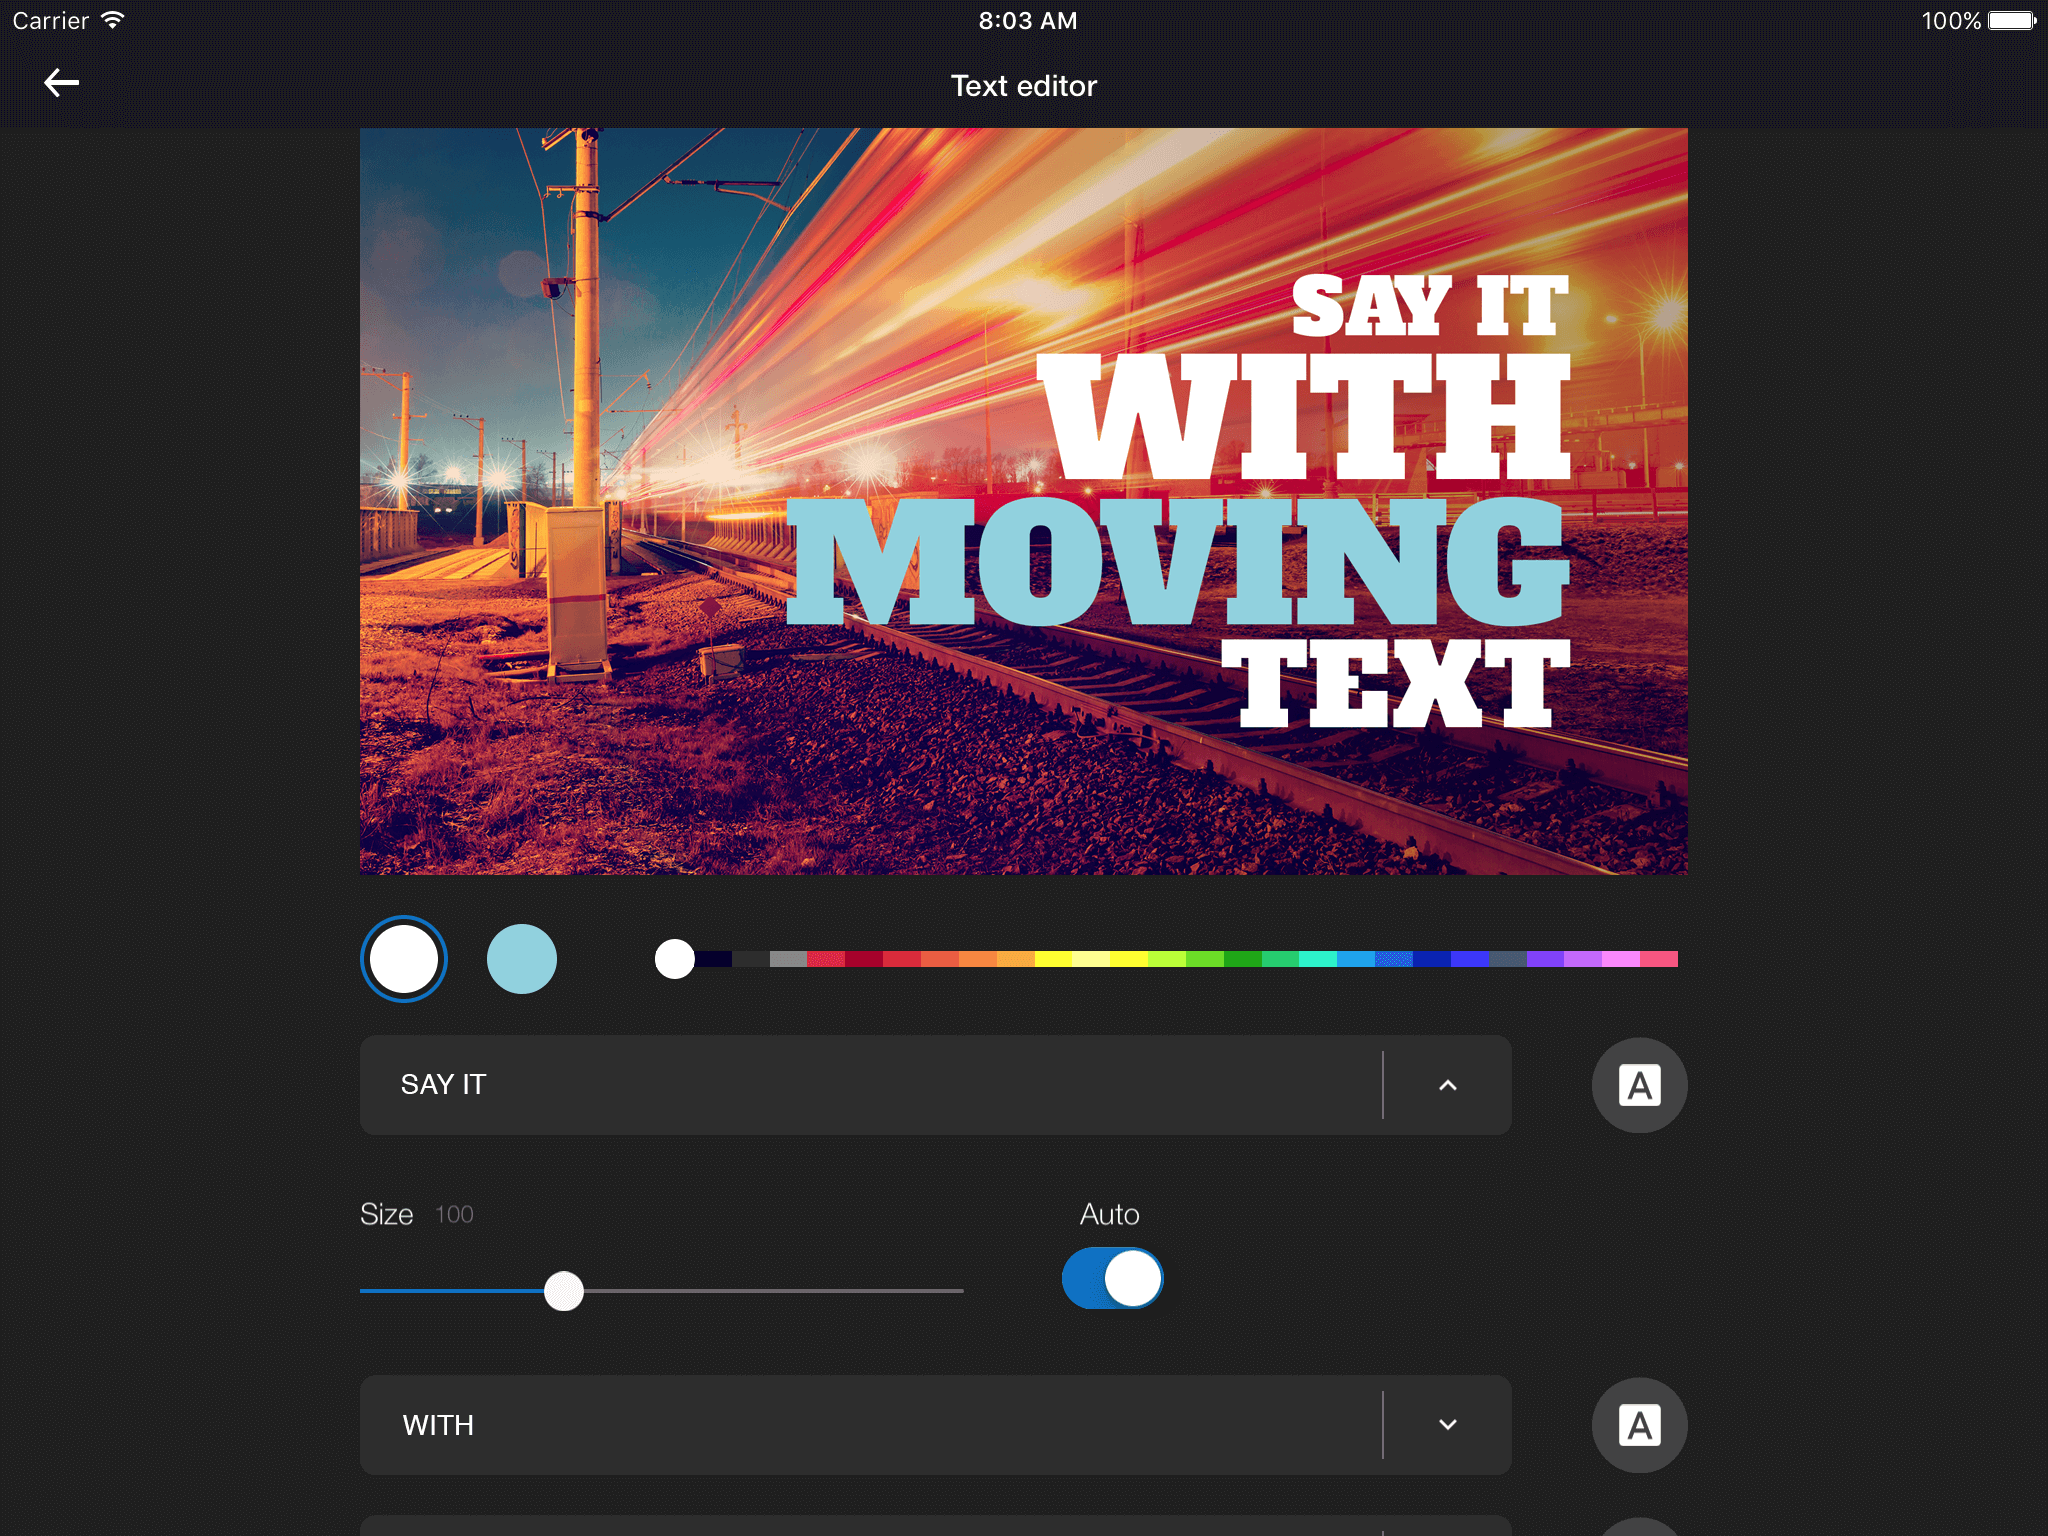 WeVideo mobile iOS video editing app adds pro-quality motion titles and graphics